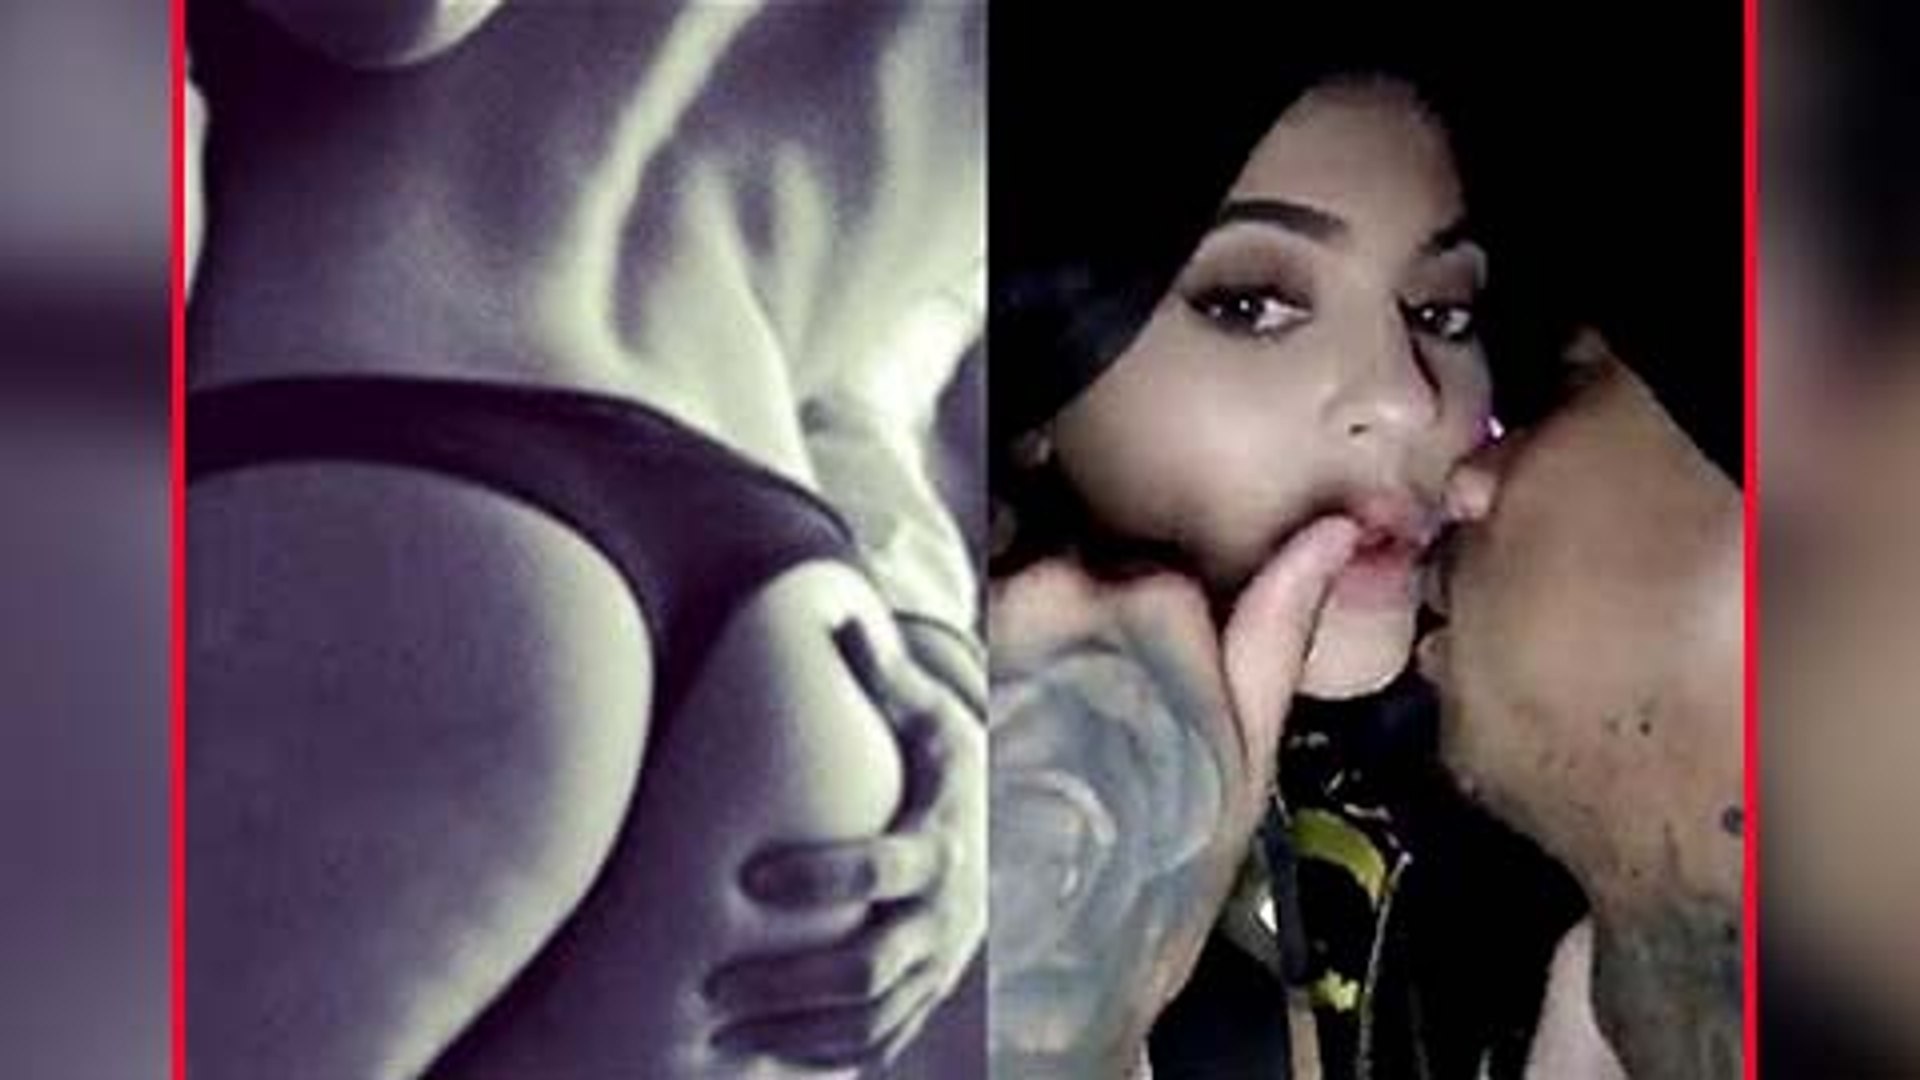 Kylie jenner and tyga leaked sextape